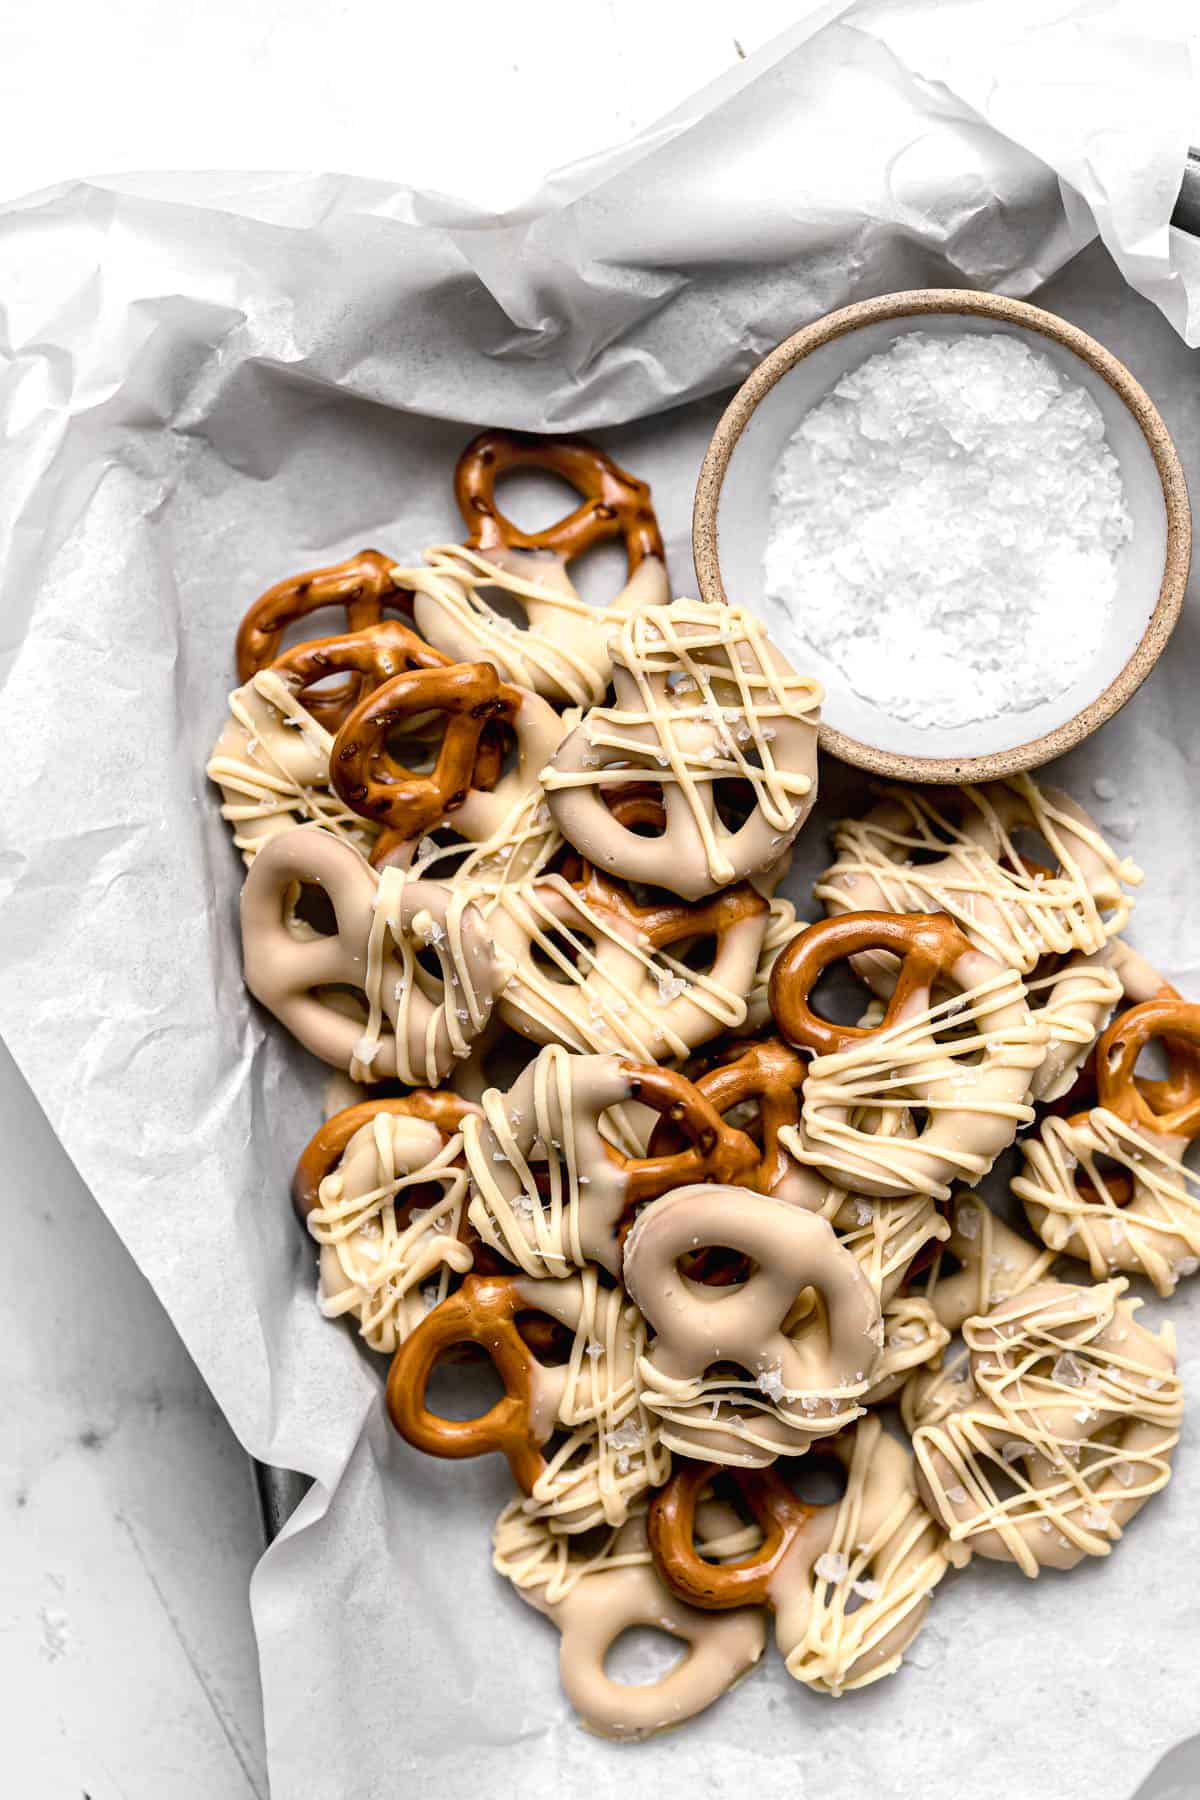 white chocolate covered pretzels in parchment lined baking sheet.